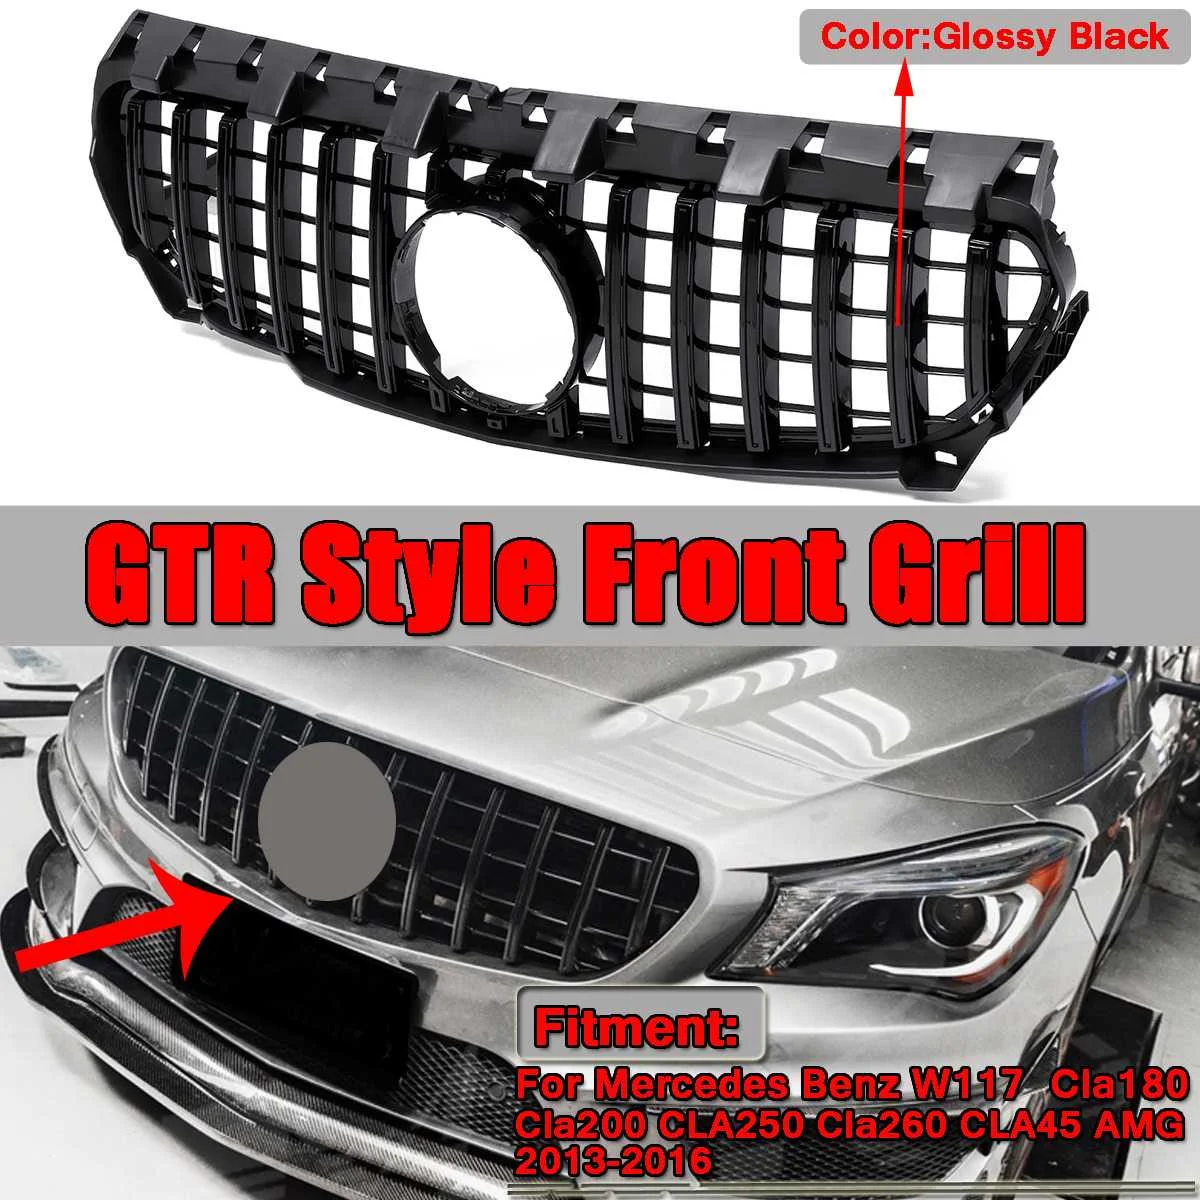 

W117 CLA18 For GTR GT Grill Car Front Grille Grill For Benz W117 CLA180 CLA200 CLA250 CLA260 CLA45 For AMG 2013-2016/2017-2018